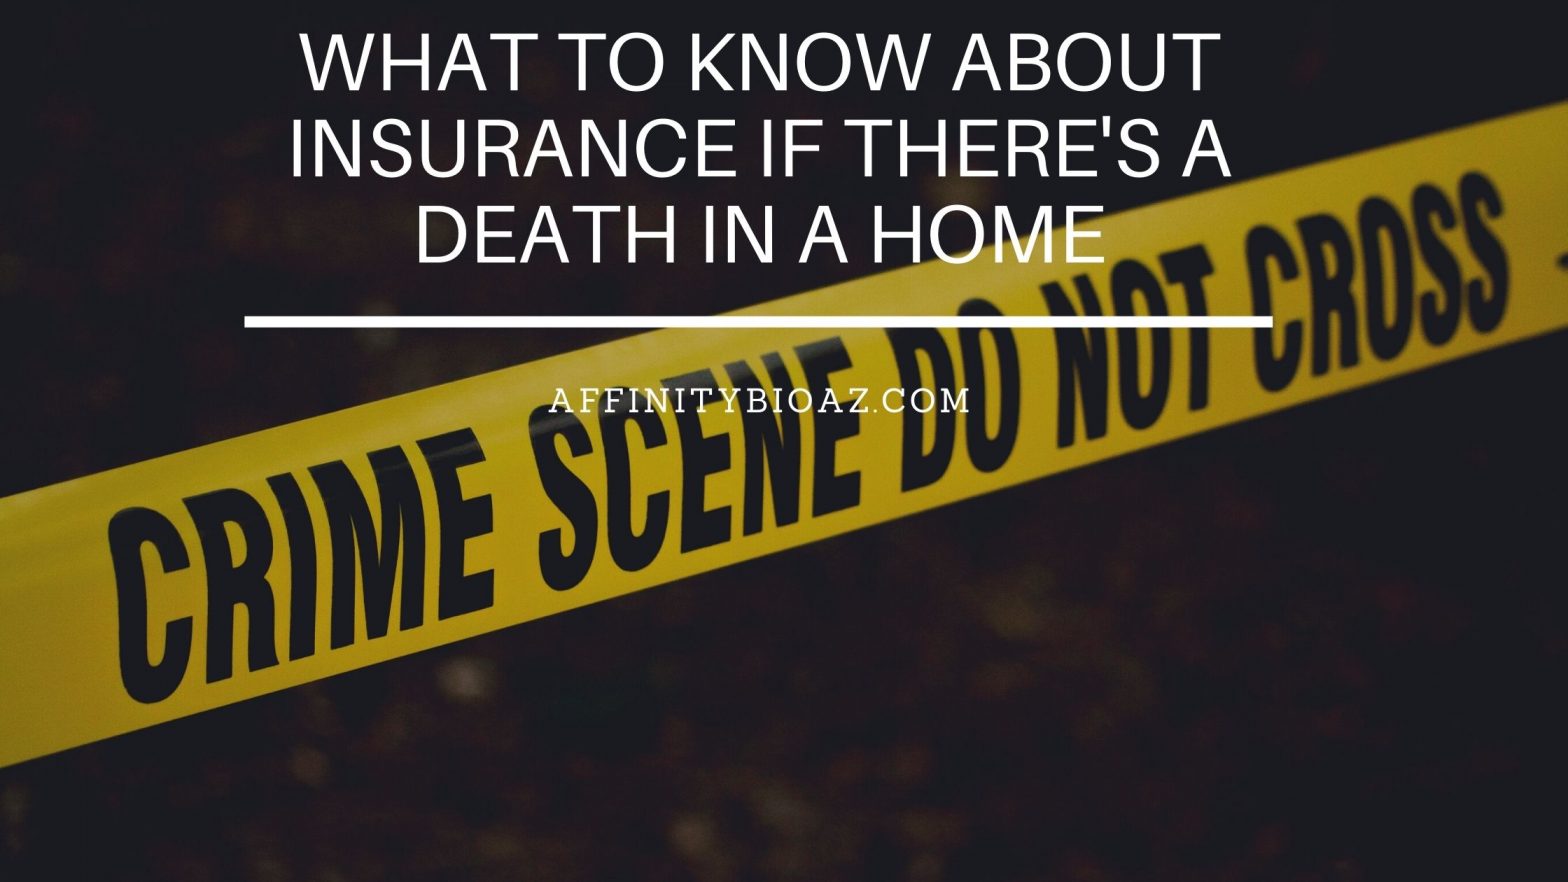 What to Know About Insurance if There's a Death in a Home